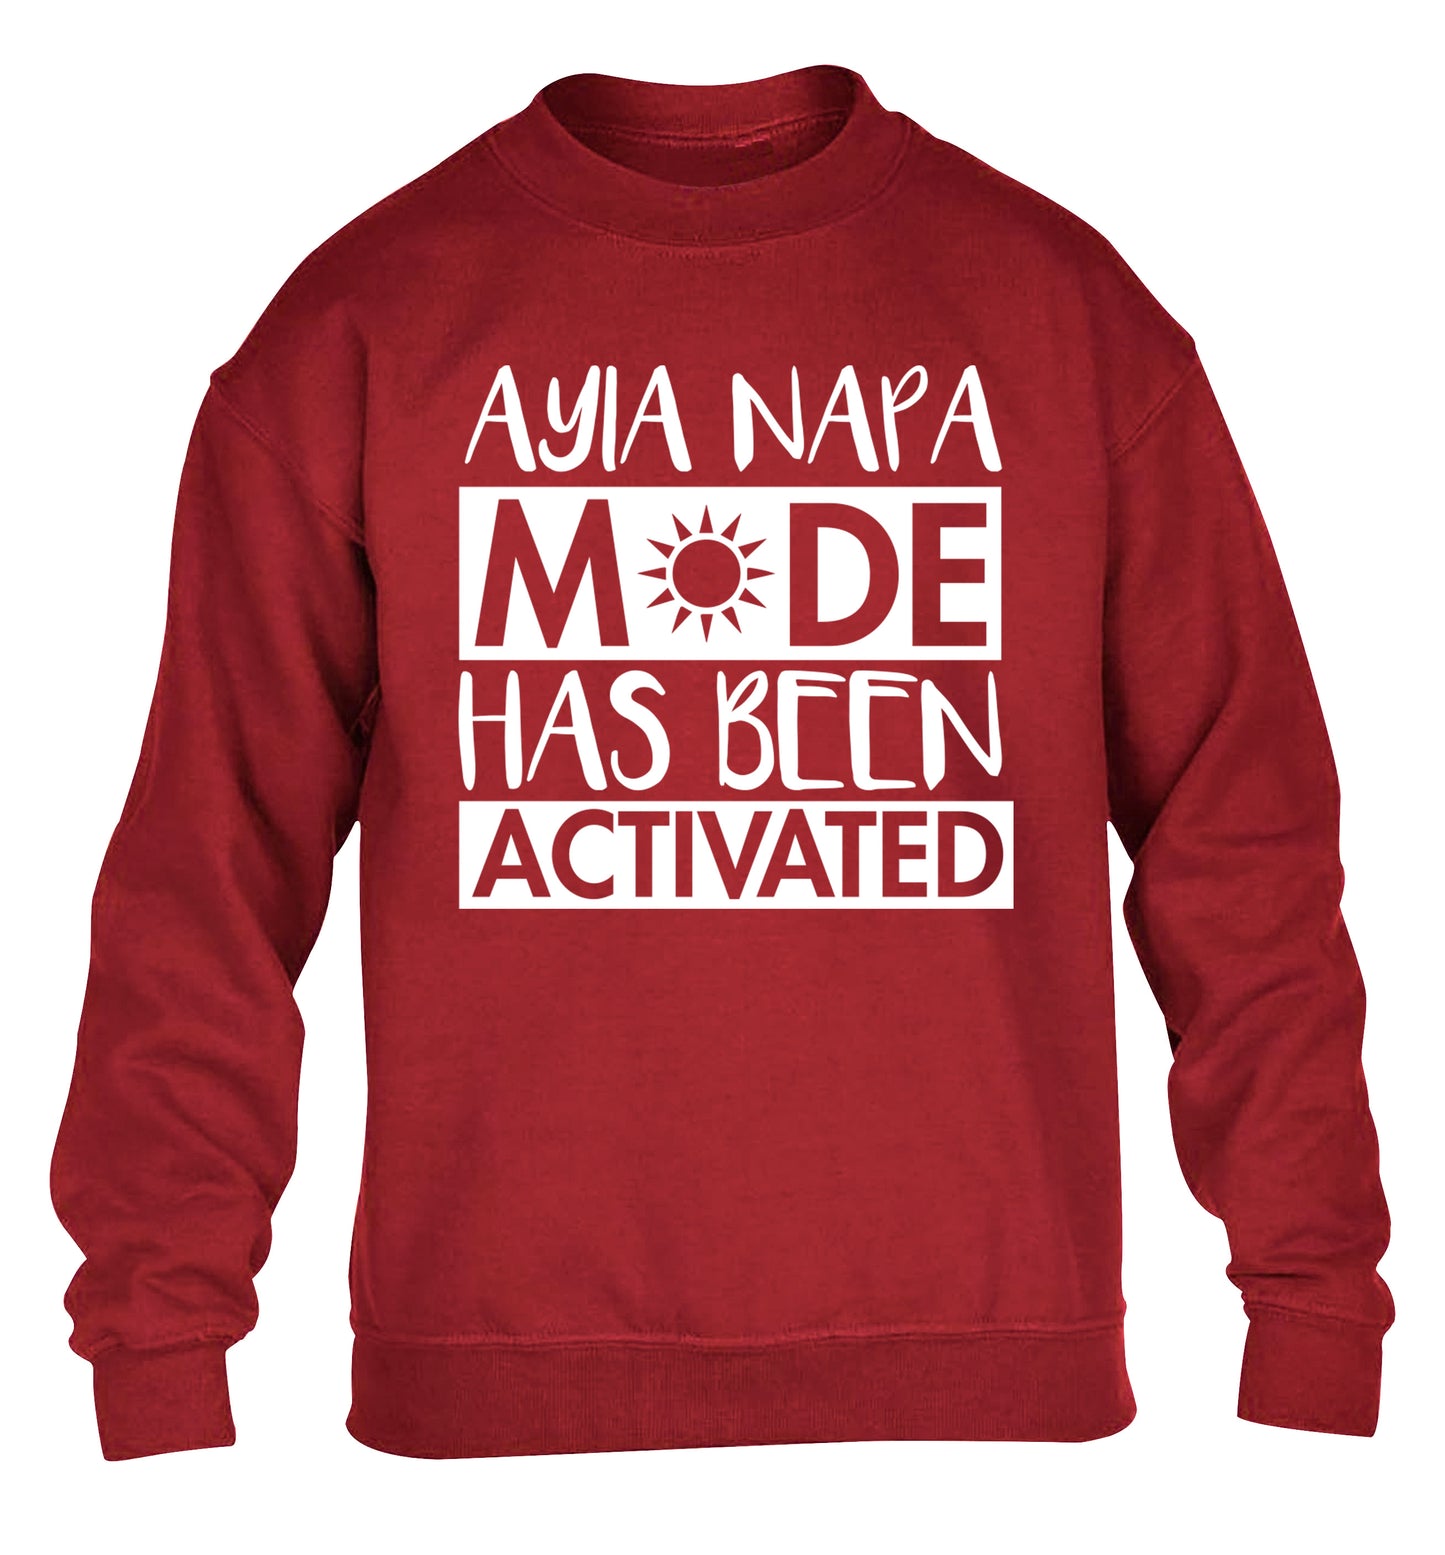 Ayia Napa mode has been activated children's grey sweater 12-13 Years